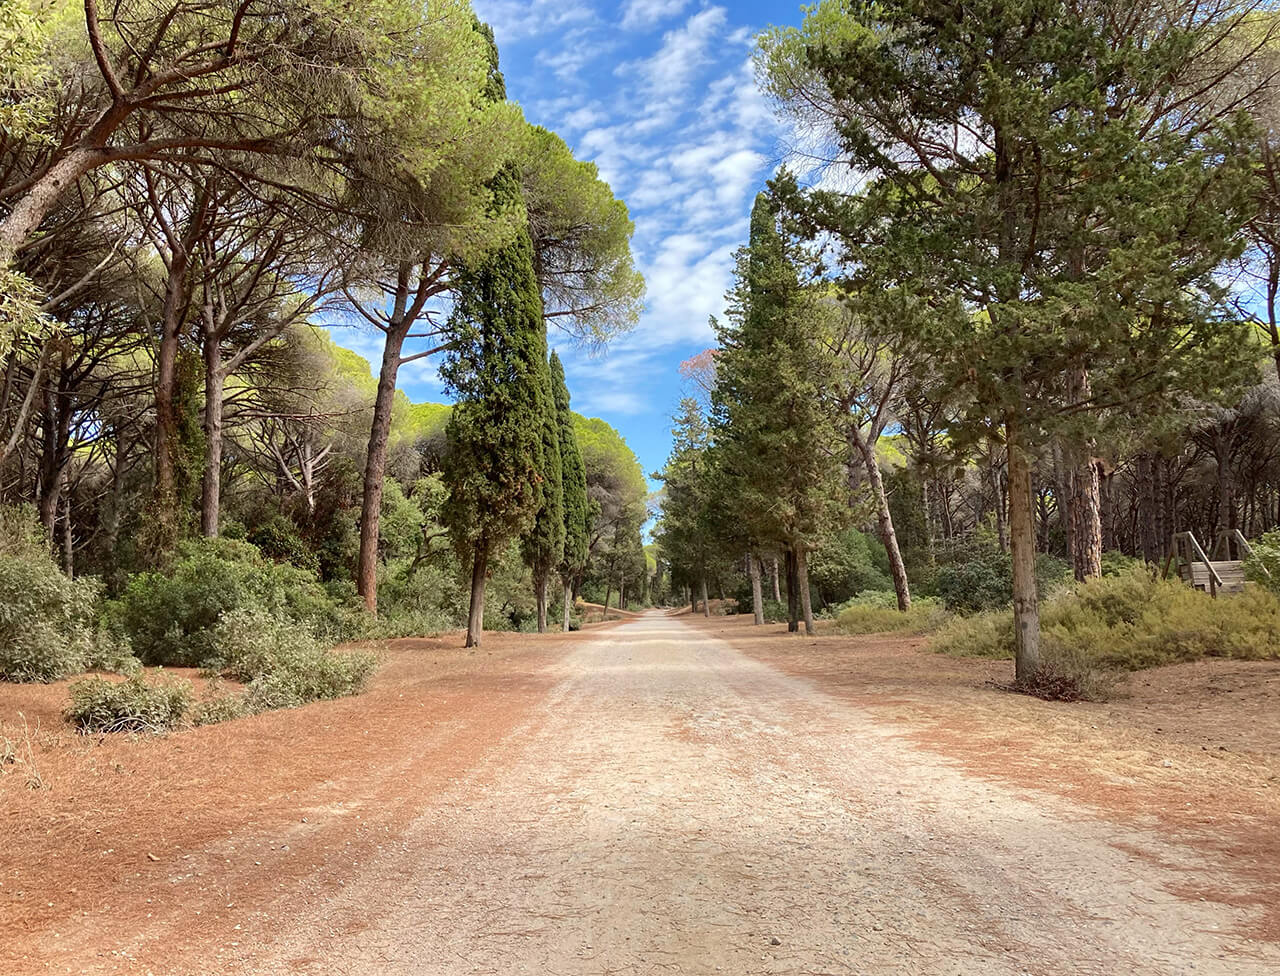 Visit the Duna Feniglia natural reserve on Tombolo della Feniglia for a peaceful escape to pine forests, nature trail for the blind, and bike rentals.